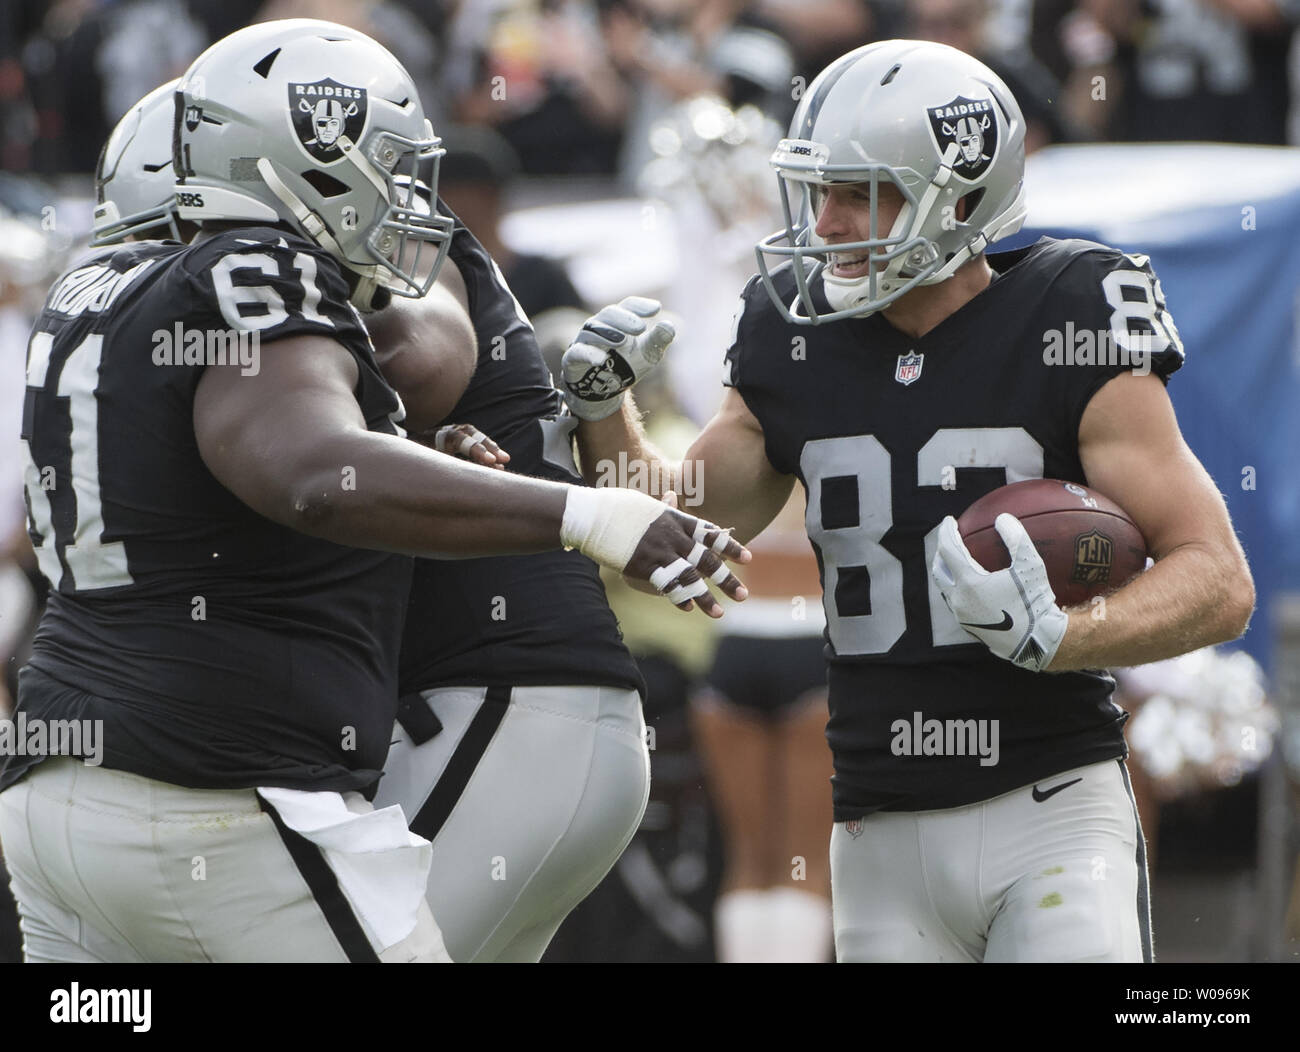 Oakland Raiders Jordy Nelson (82) celebrates a 19 yard TD pass from Derek Carr in the fourth quarter against the Cleveland Browns at the Coliseum in Oakland, California on September 30, 2018. The Raiders defeated the Browns 45-42 in overtime.     Photo by Terry Schmitt/UPI Stock Photo